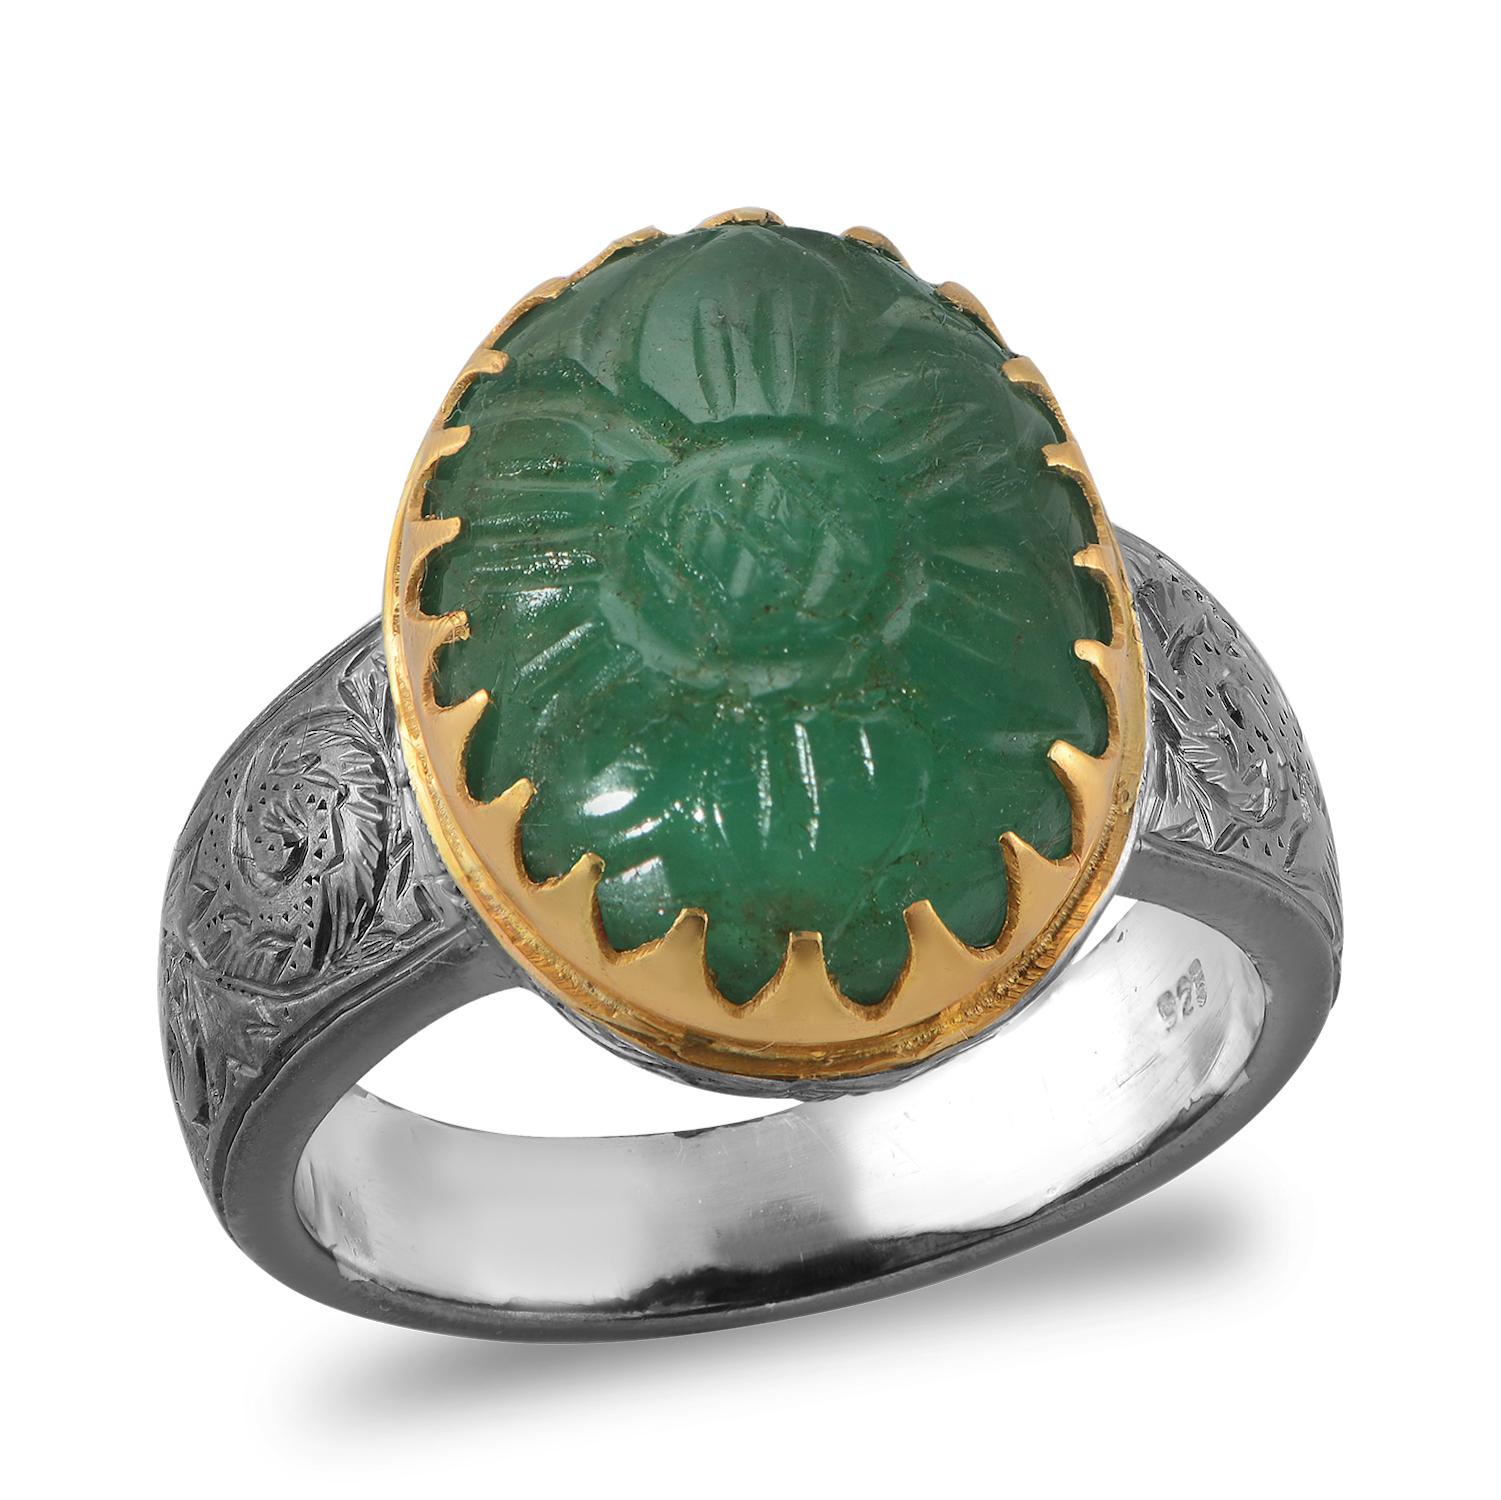 

This fabulous one of a kind ring has been handmade in our workshops. It has a hand carved emerald in the centre, set in 18k gold. The shank of the ring which is made in oxidized sterling silver has exquisite Mughal Art work inscribed on it.

Ring